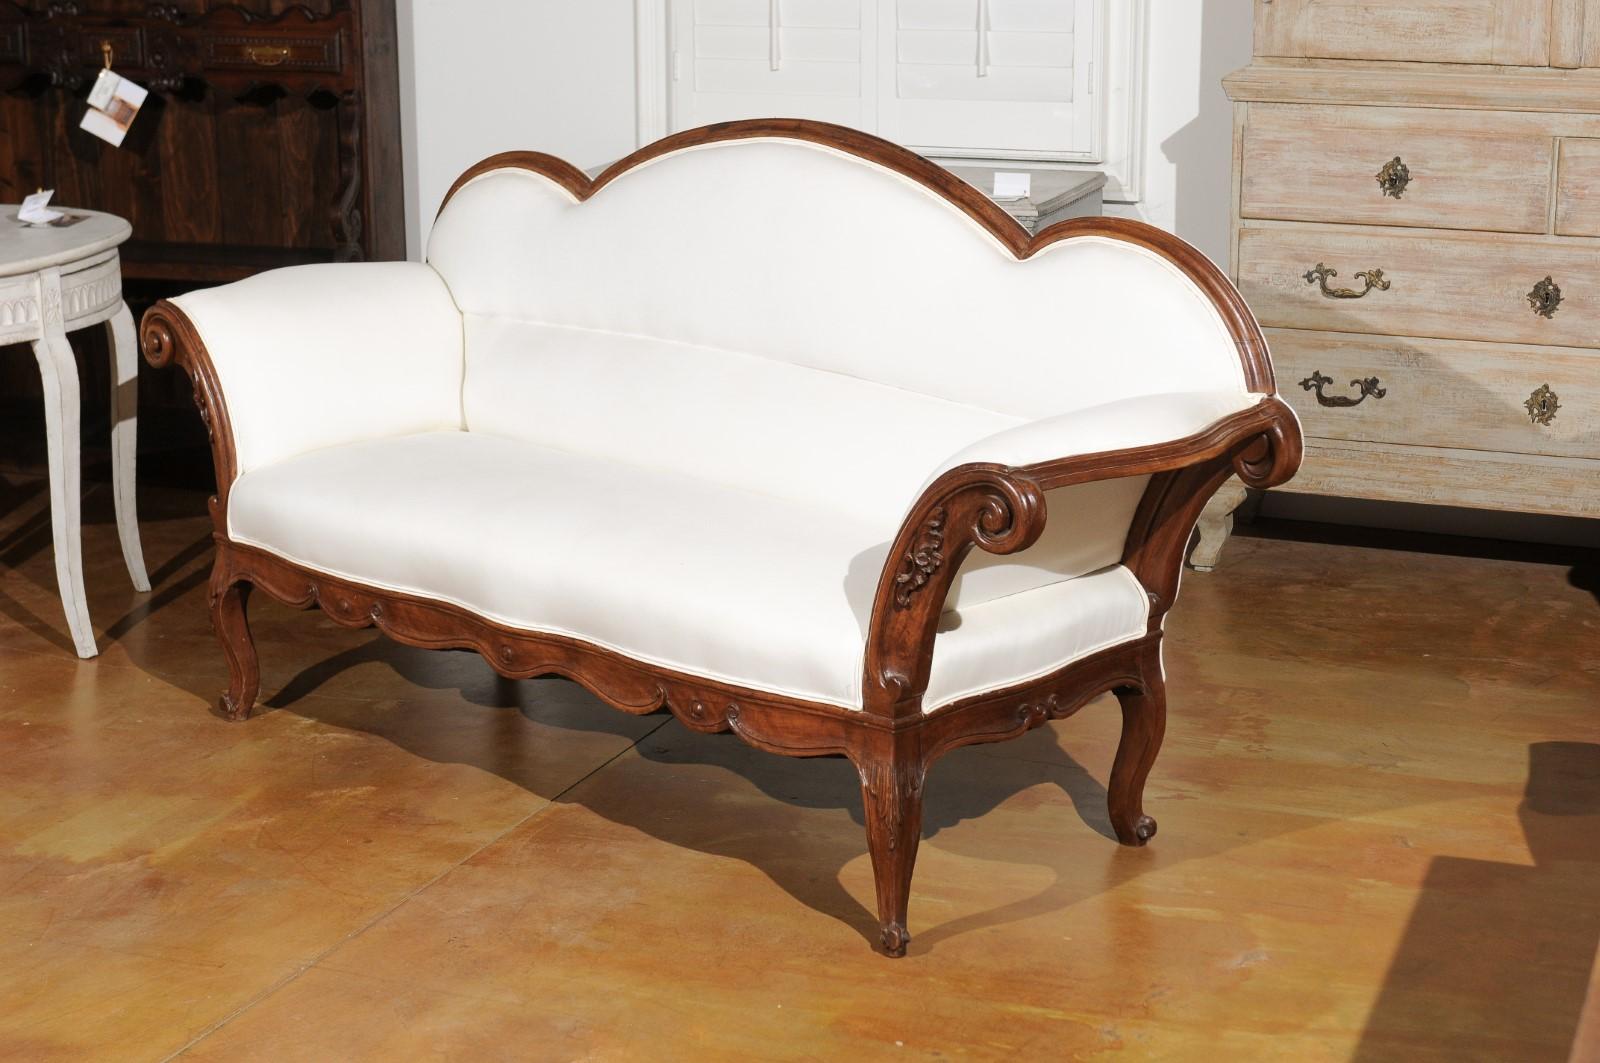 Italian 1750s Walnut Tripled Arched Sofa from Lombardy with New Upholstery For Sale 2